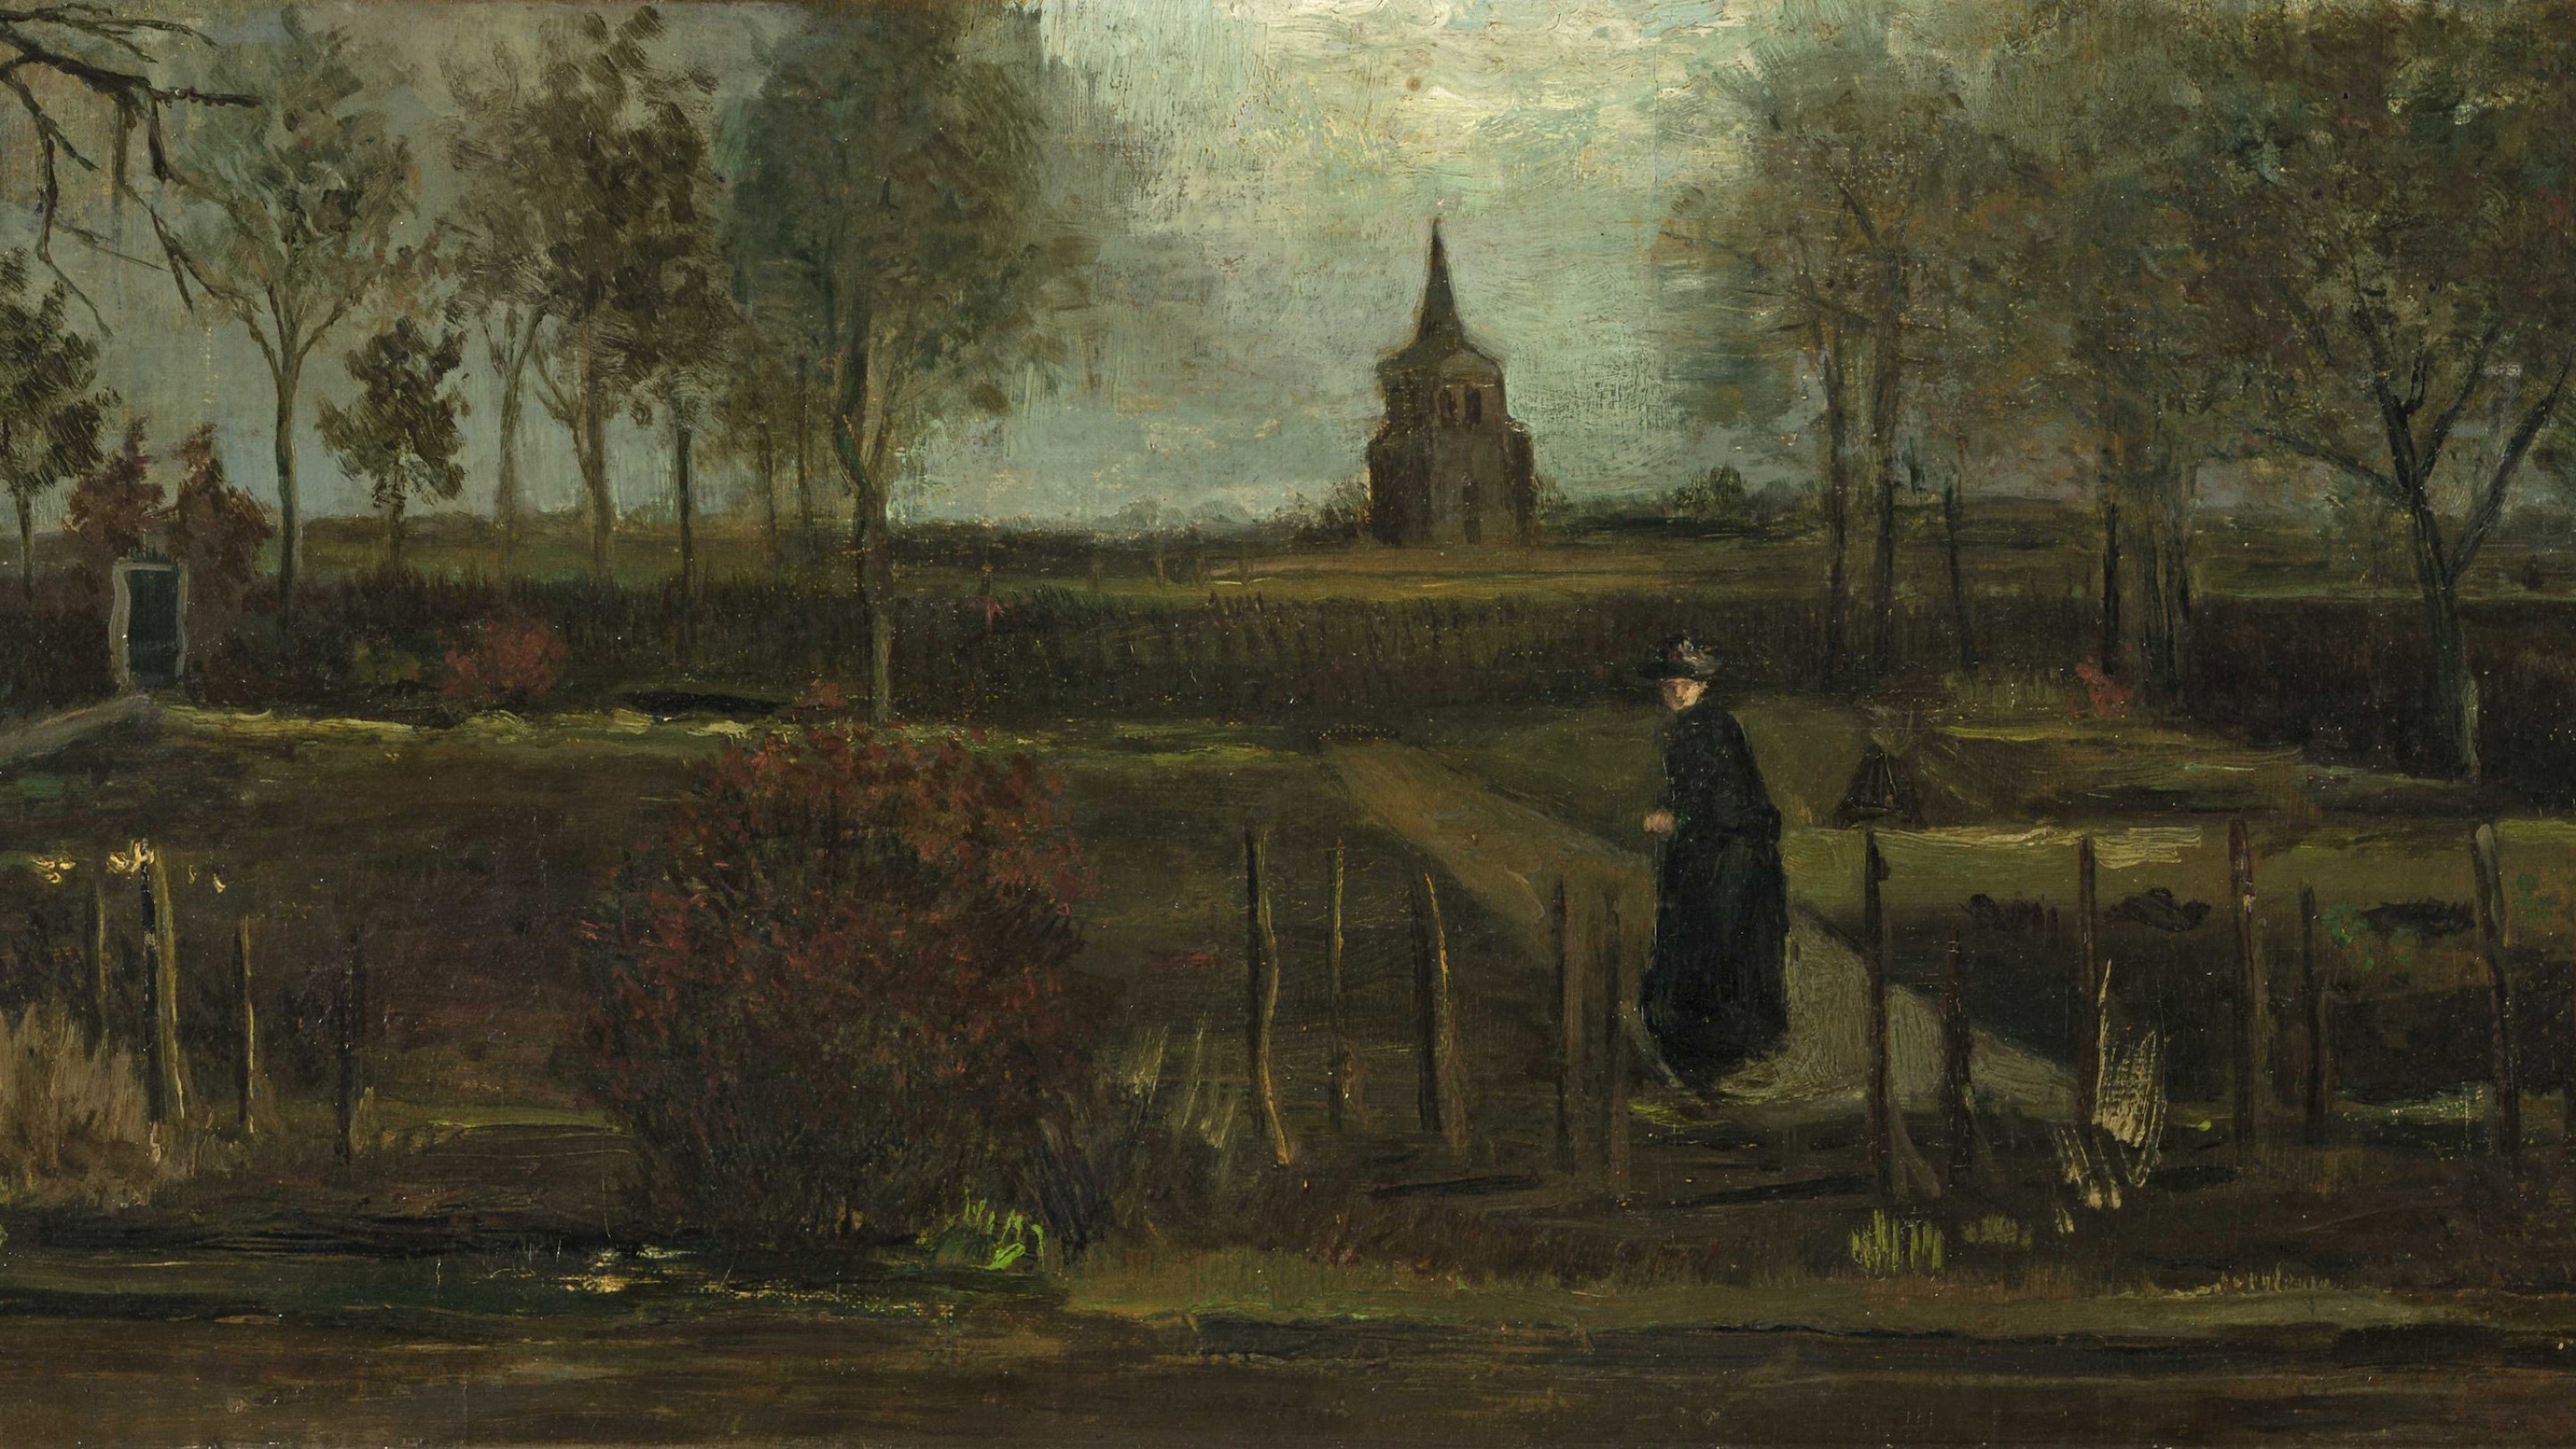 A handout file photo dated 17 October 2013 made available by the Groninger Museum shows the painting "Spring Garden", the rectory garden in Nuenen in the spring by the painter Vincent van Gogh in Groningen, Netherlands. Van Gogh's work was stolen from the Singer Laren museum on 30 March 2020. The painting was on loan from the Groninger Museum. Vincent van Gogh's work "Spring Garden" stolen from the Singer Laren museum, Groningen, Netherlands - 17 Oct 2013